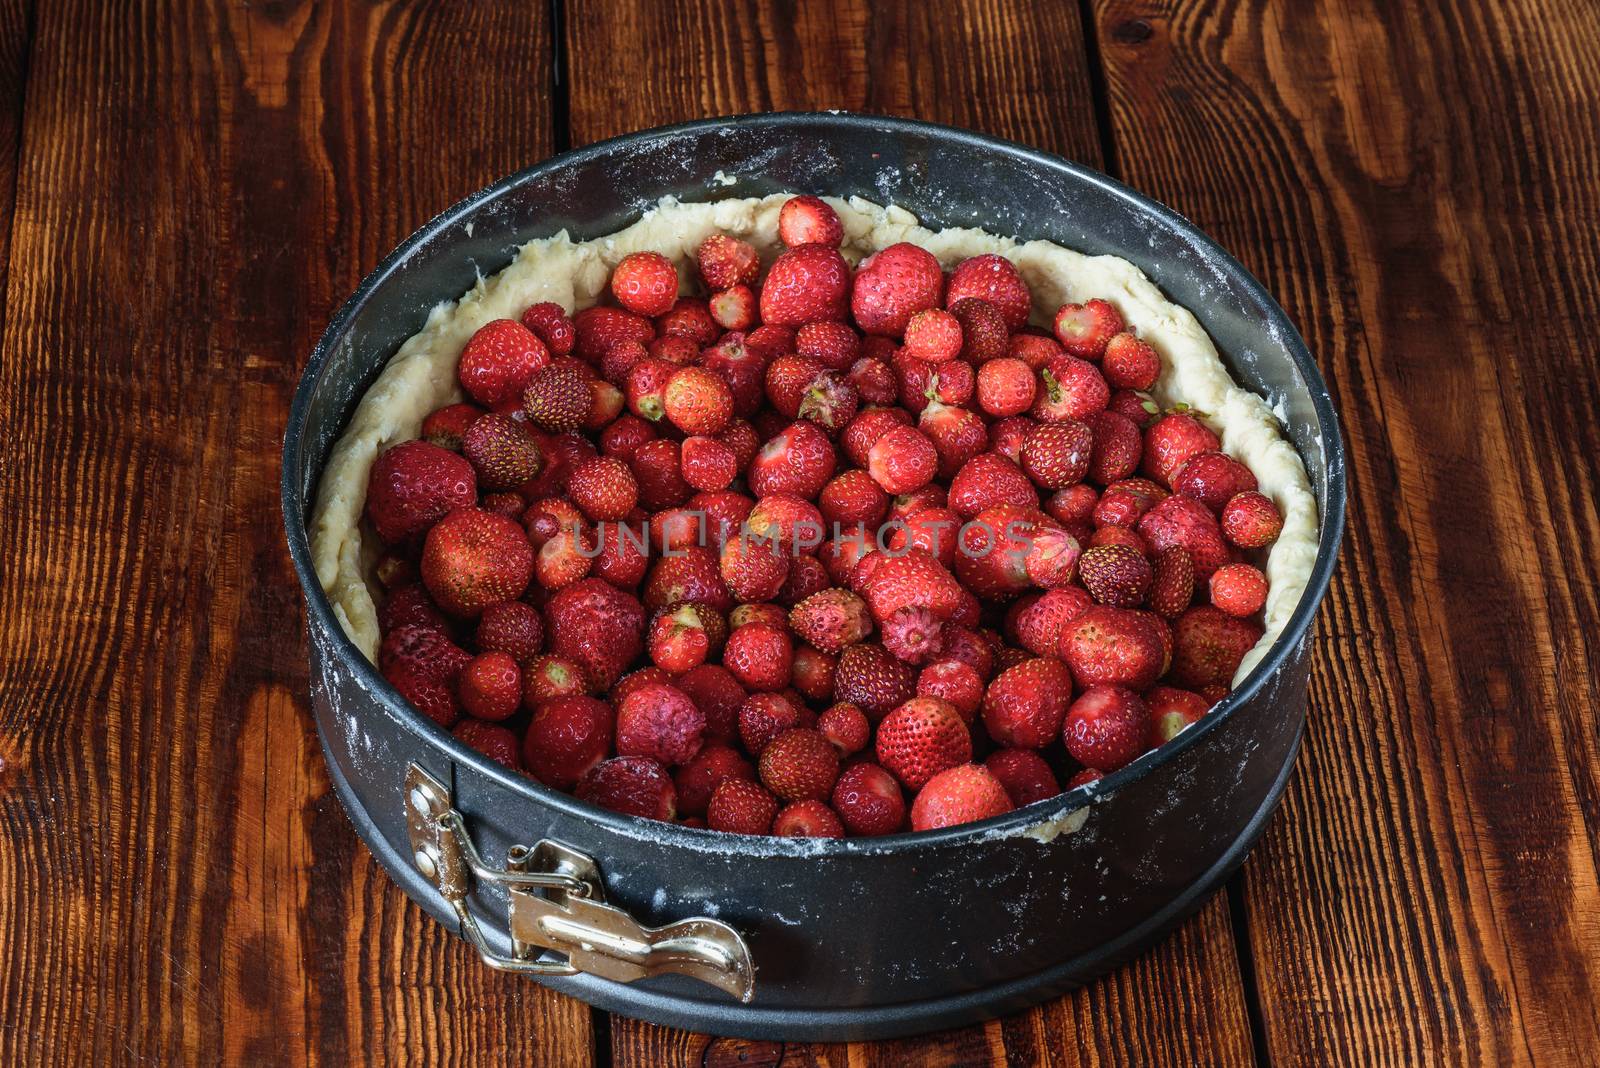 Cooking strawberry cake in metal baking dish on wooden table